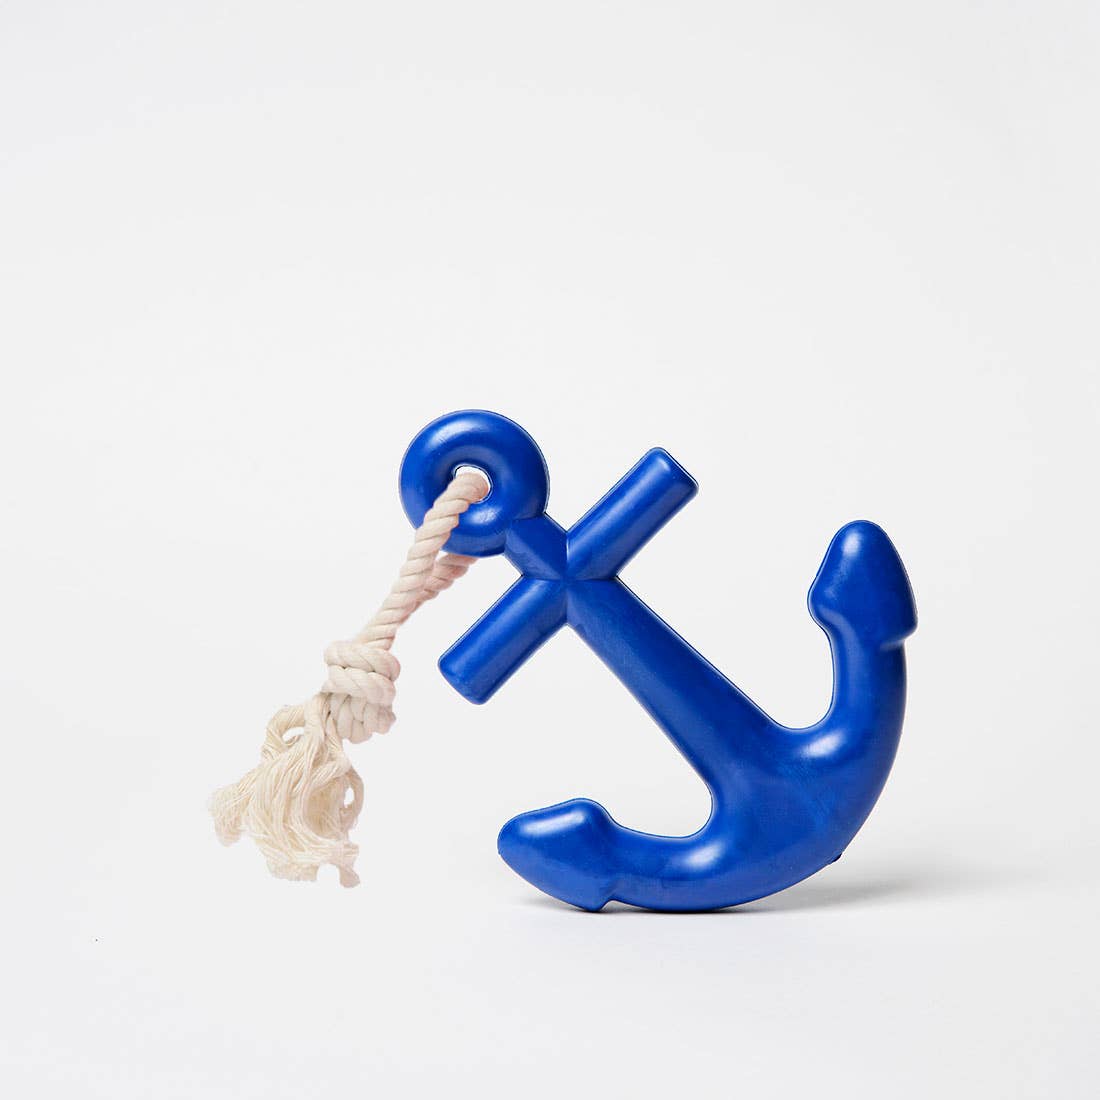 Waggo - Anchors Aweigh Rubber Dog Toy  Image